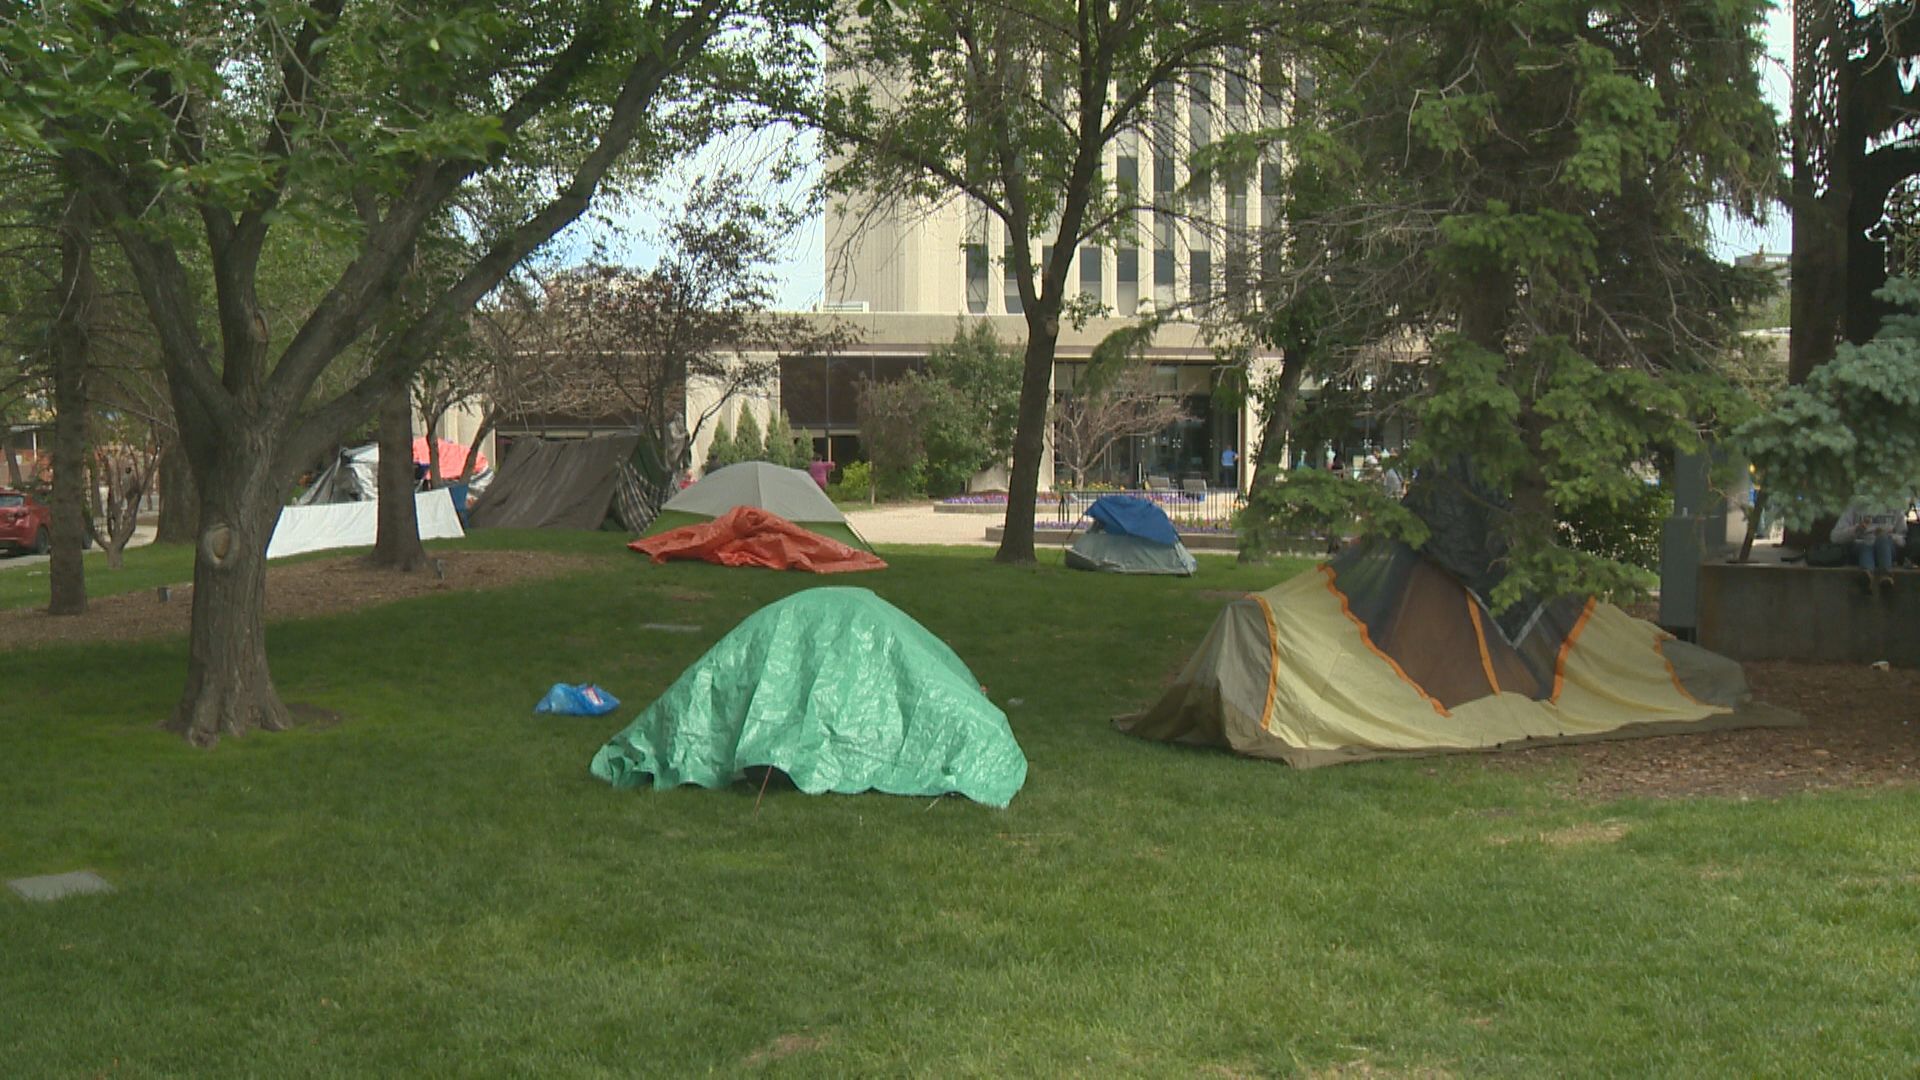 Regina tent encampment, one year later: What has changed since?